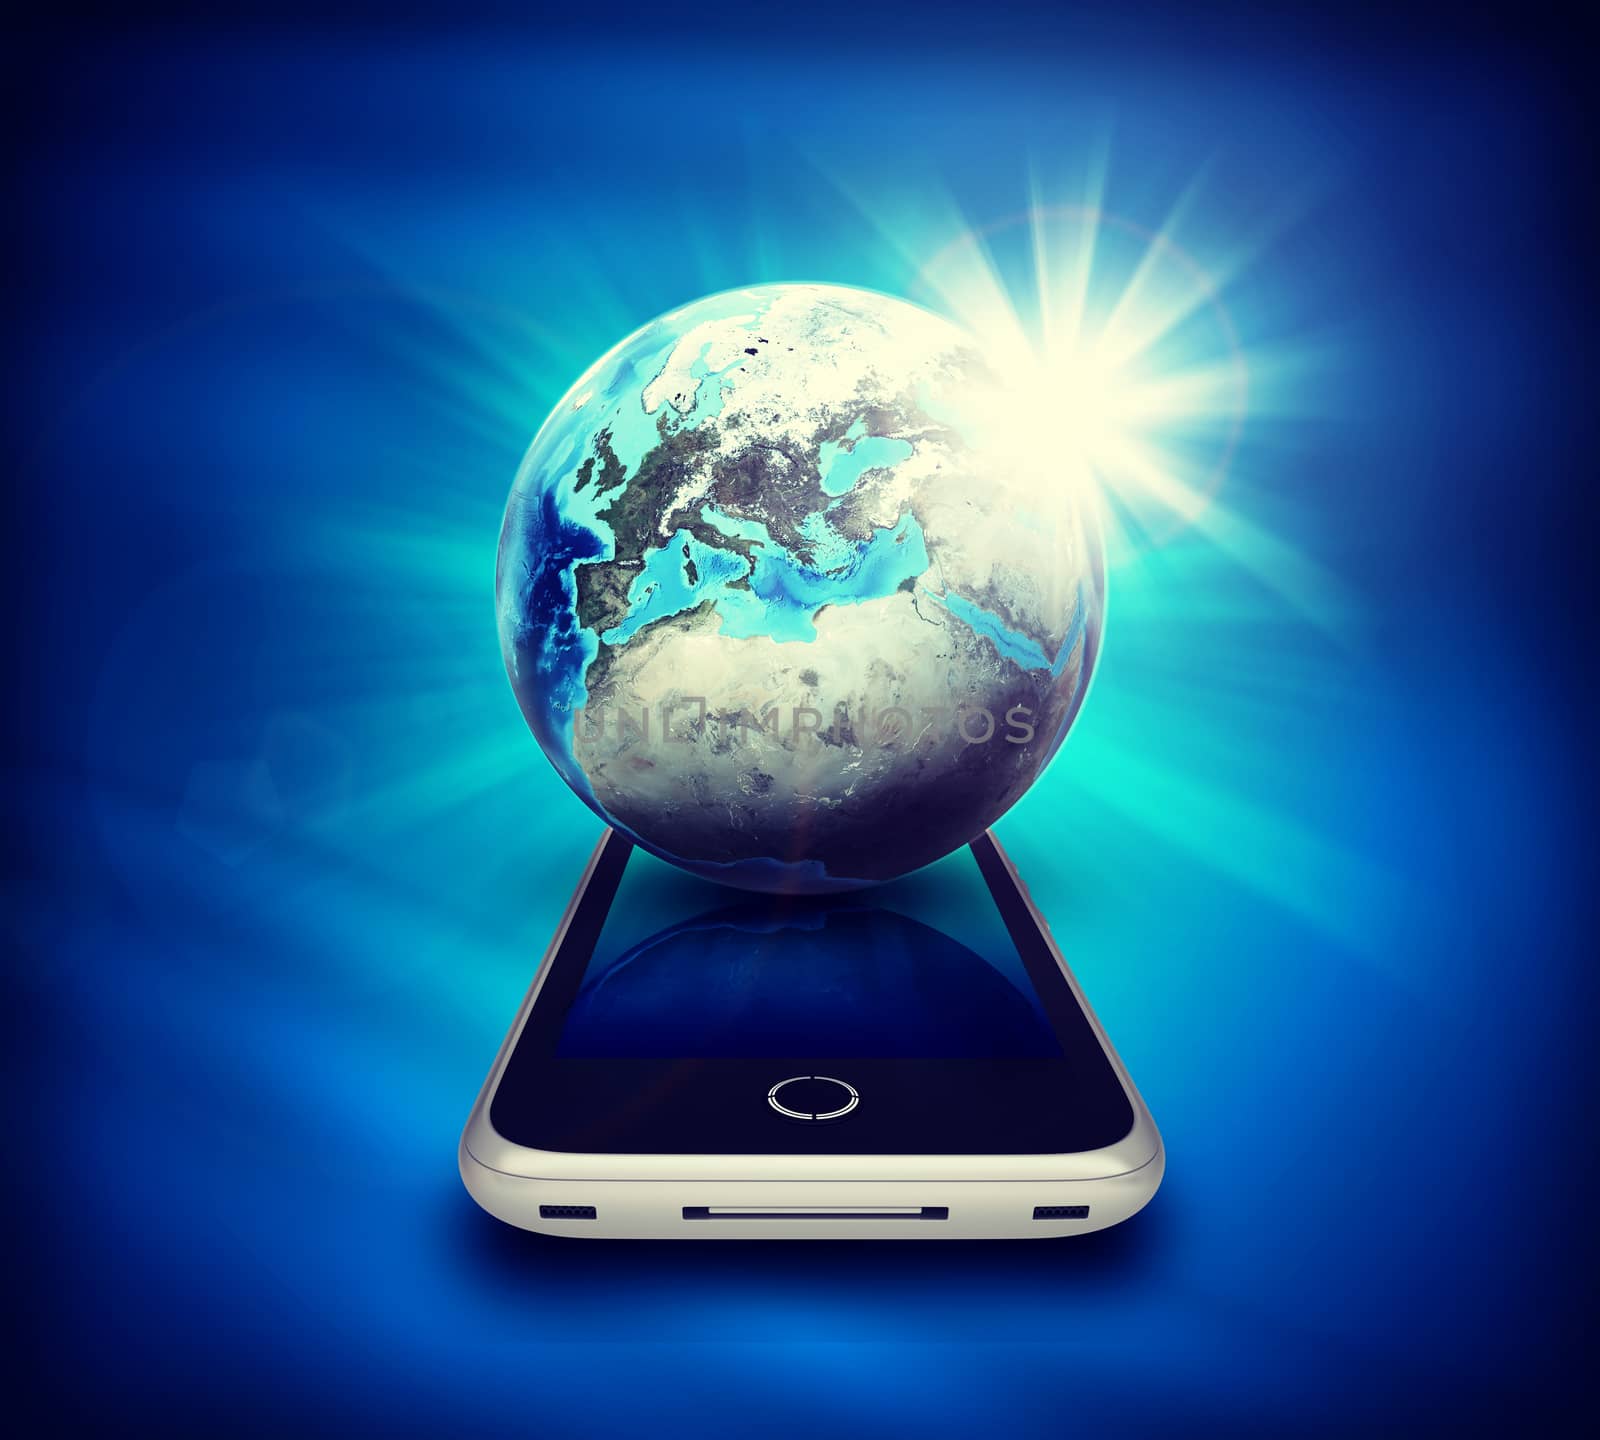 Earth model with mobile phone on abstract blue background, front view. Elements of this image furnished by NASA